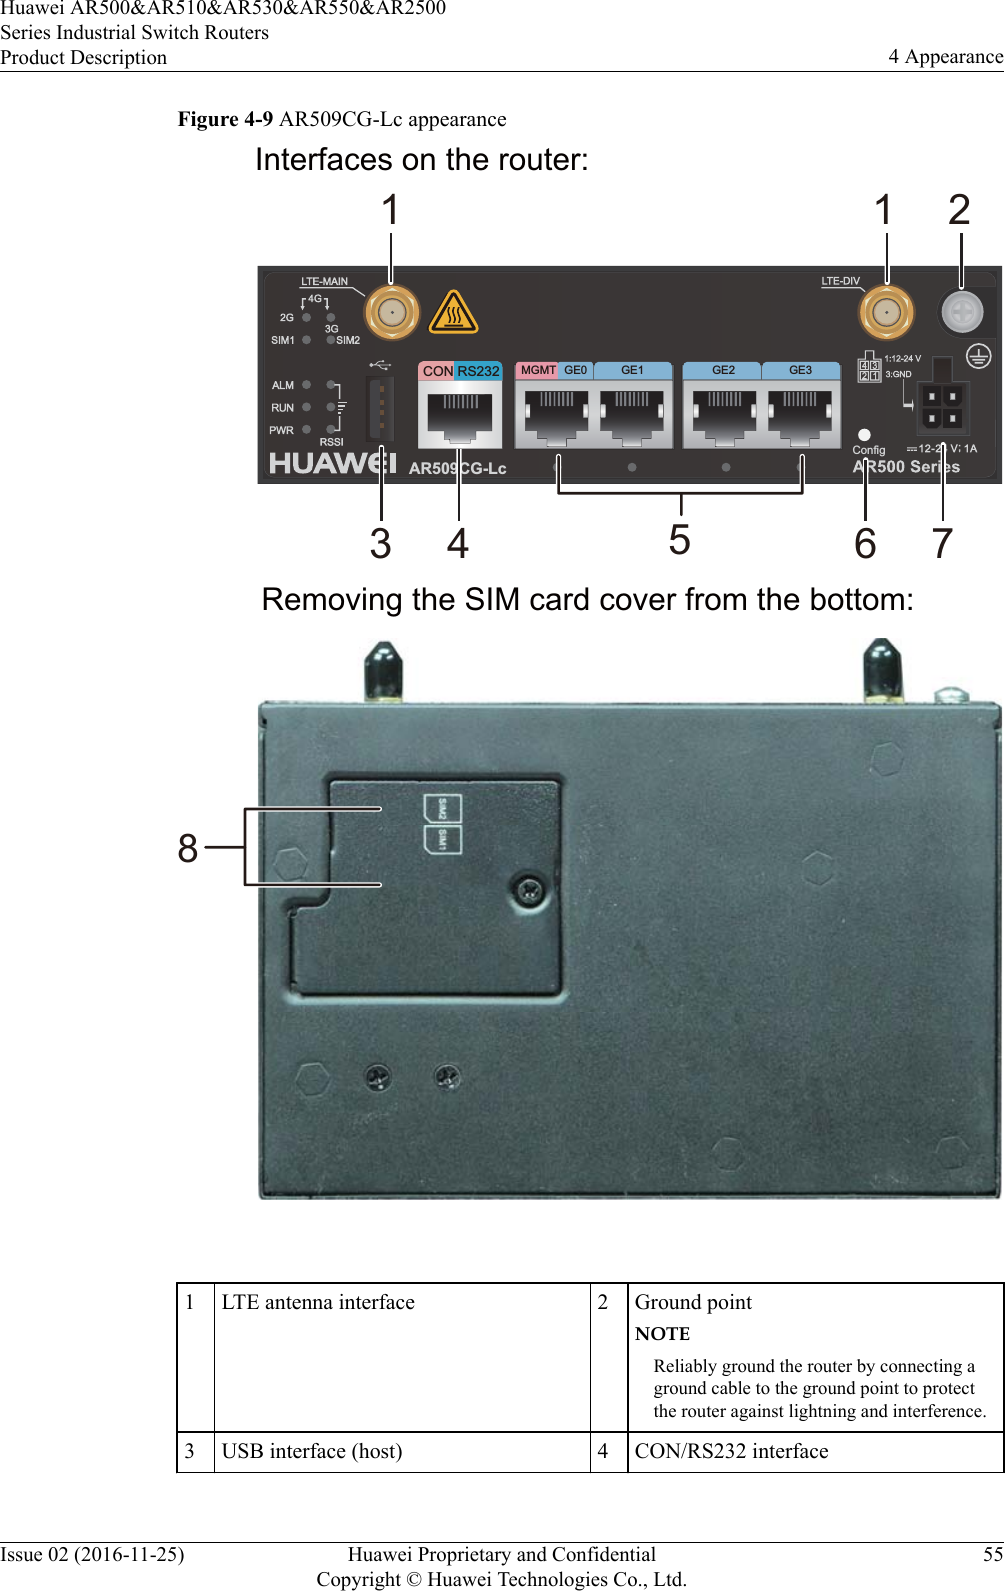 Figure 4-9 AR509CG-Lc appearanceConfigGE1MGMT GE0 GE3AR509CG-Lc653 41271CON RS232GE2Removing the SIM card cover from the bottom:Interfaces on the router:8 1LTE antenna interface 2 Ground pointNOTEReliably ground the router by connecting aground cable to the ground point to protectthe router against lightning and interference.3 USB interface (host) 4 CON/RS232 interfaceHuawei AR500&amp;AR510&amp;AR530&amp;AR550&amp;AR2500Series Industrial Switch RoutersProduct Description 4 AppearanceIssue 02 (2016-11-25) Huawei Proprietary and ConfidentialCopyright © Huawei Technologies Co., Ltd.55